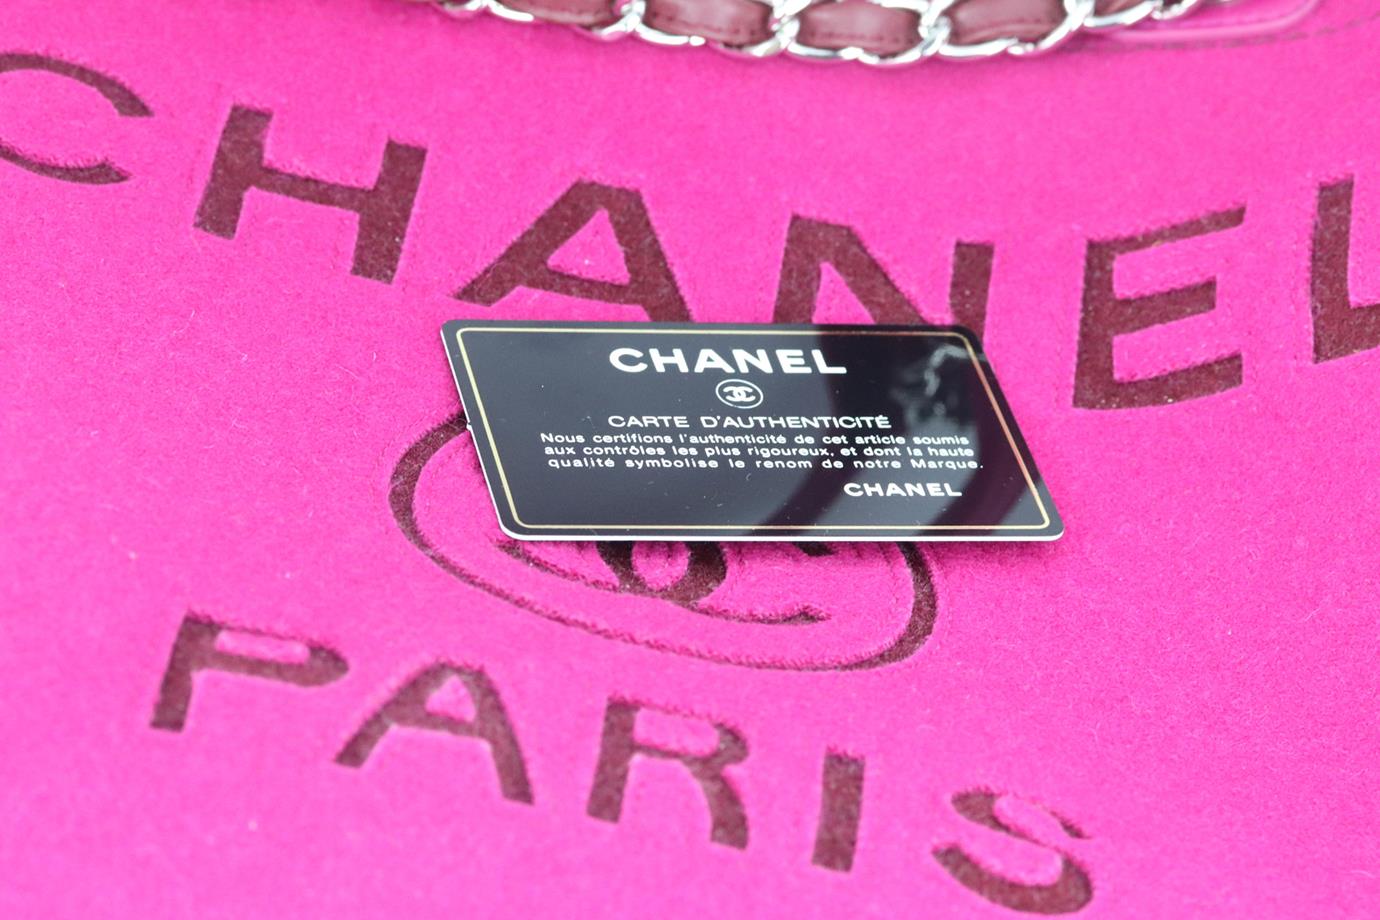 CHANEL 2019 DEAUVILLE LARGE WOOL FELT TOTE BAG